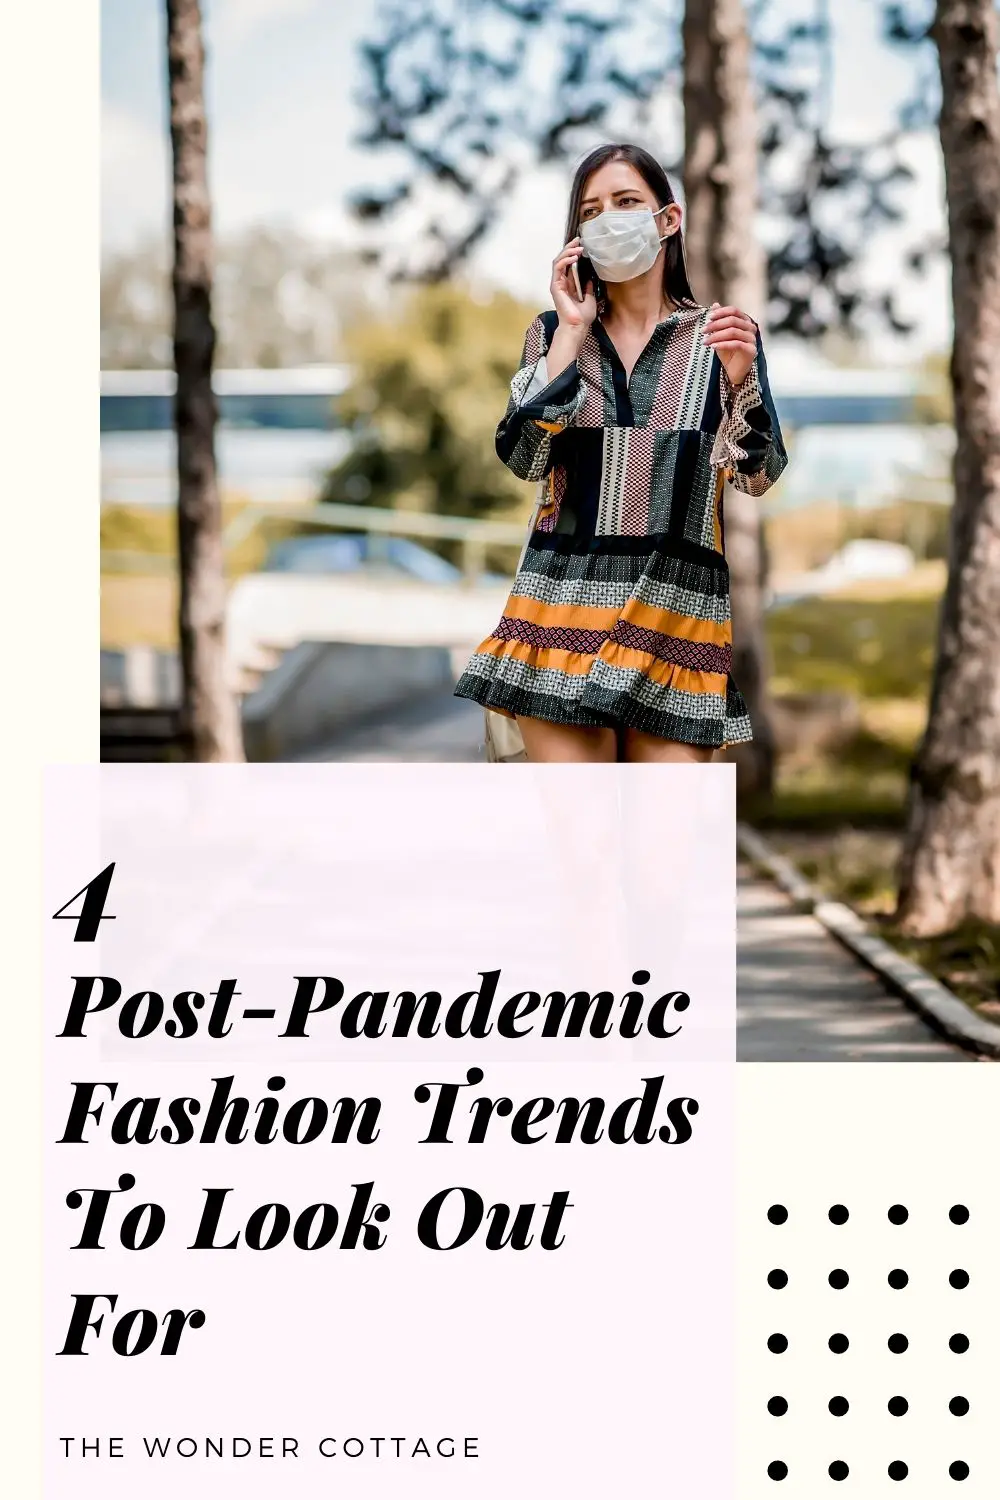 4 Post-Pandemic Fashion Trends To Look Out For